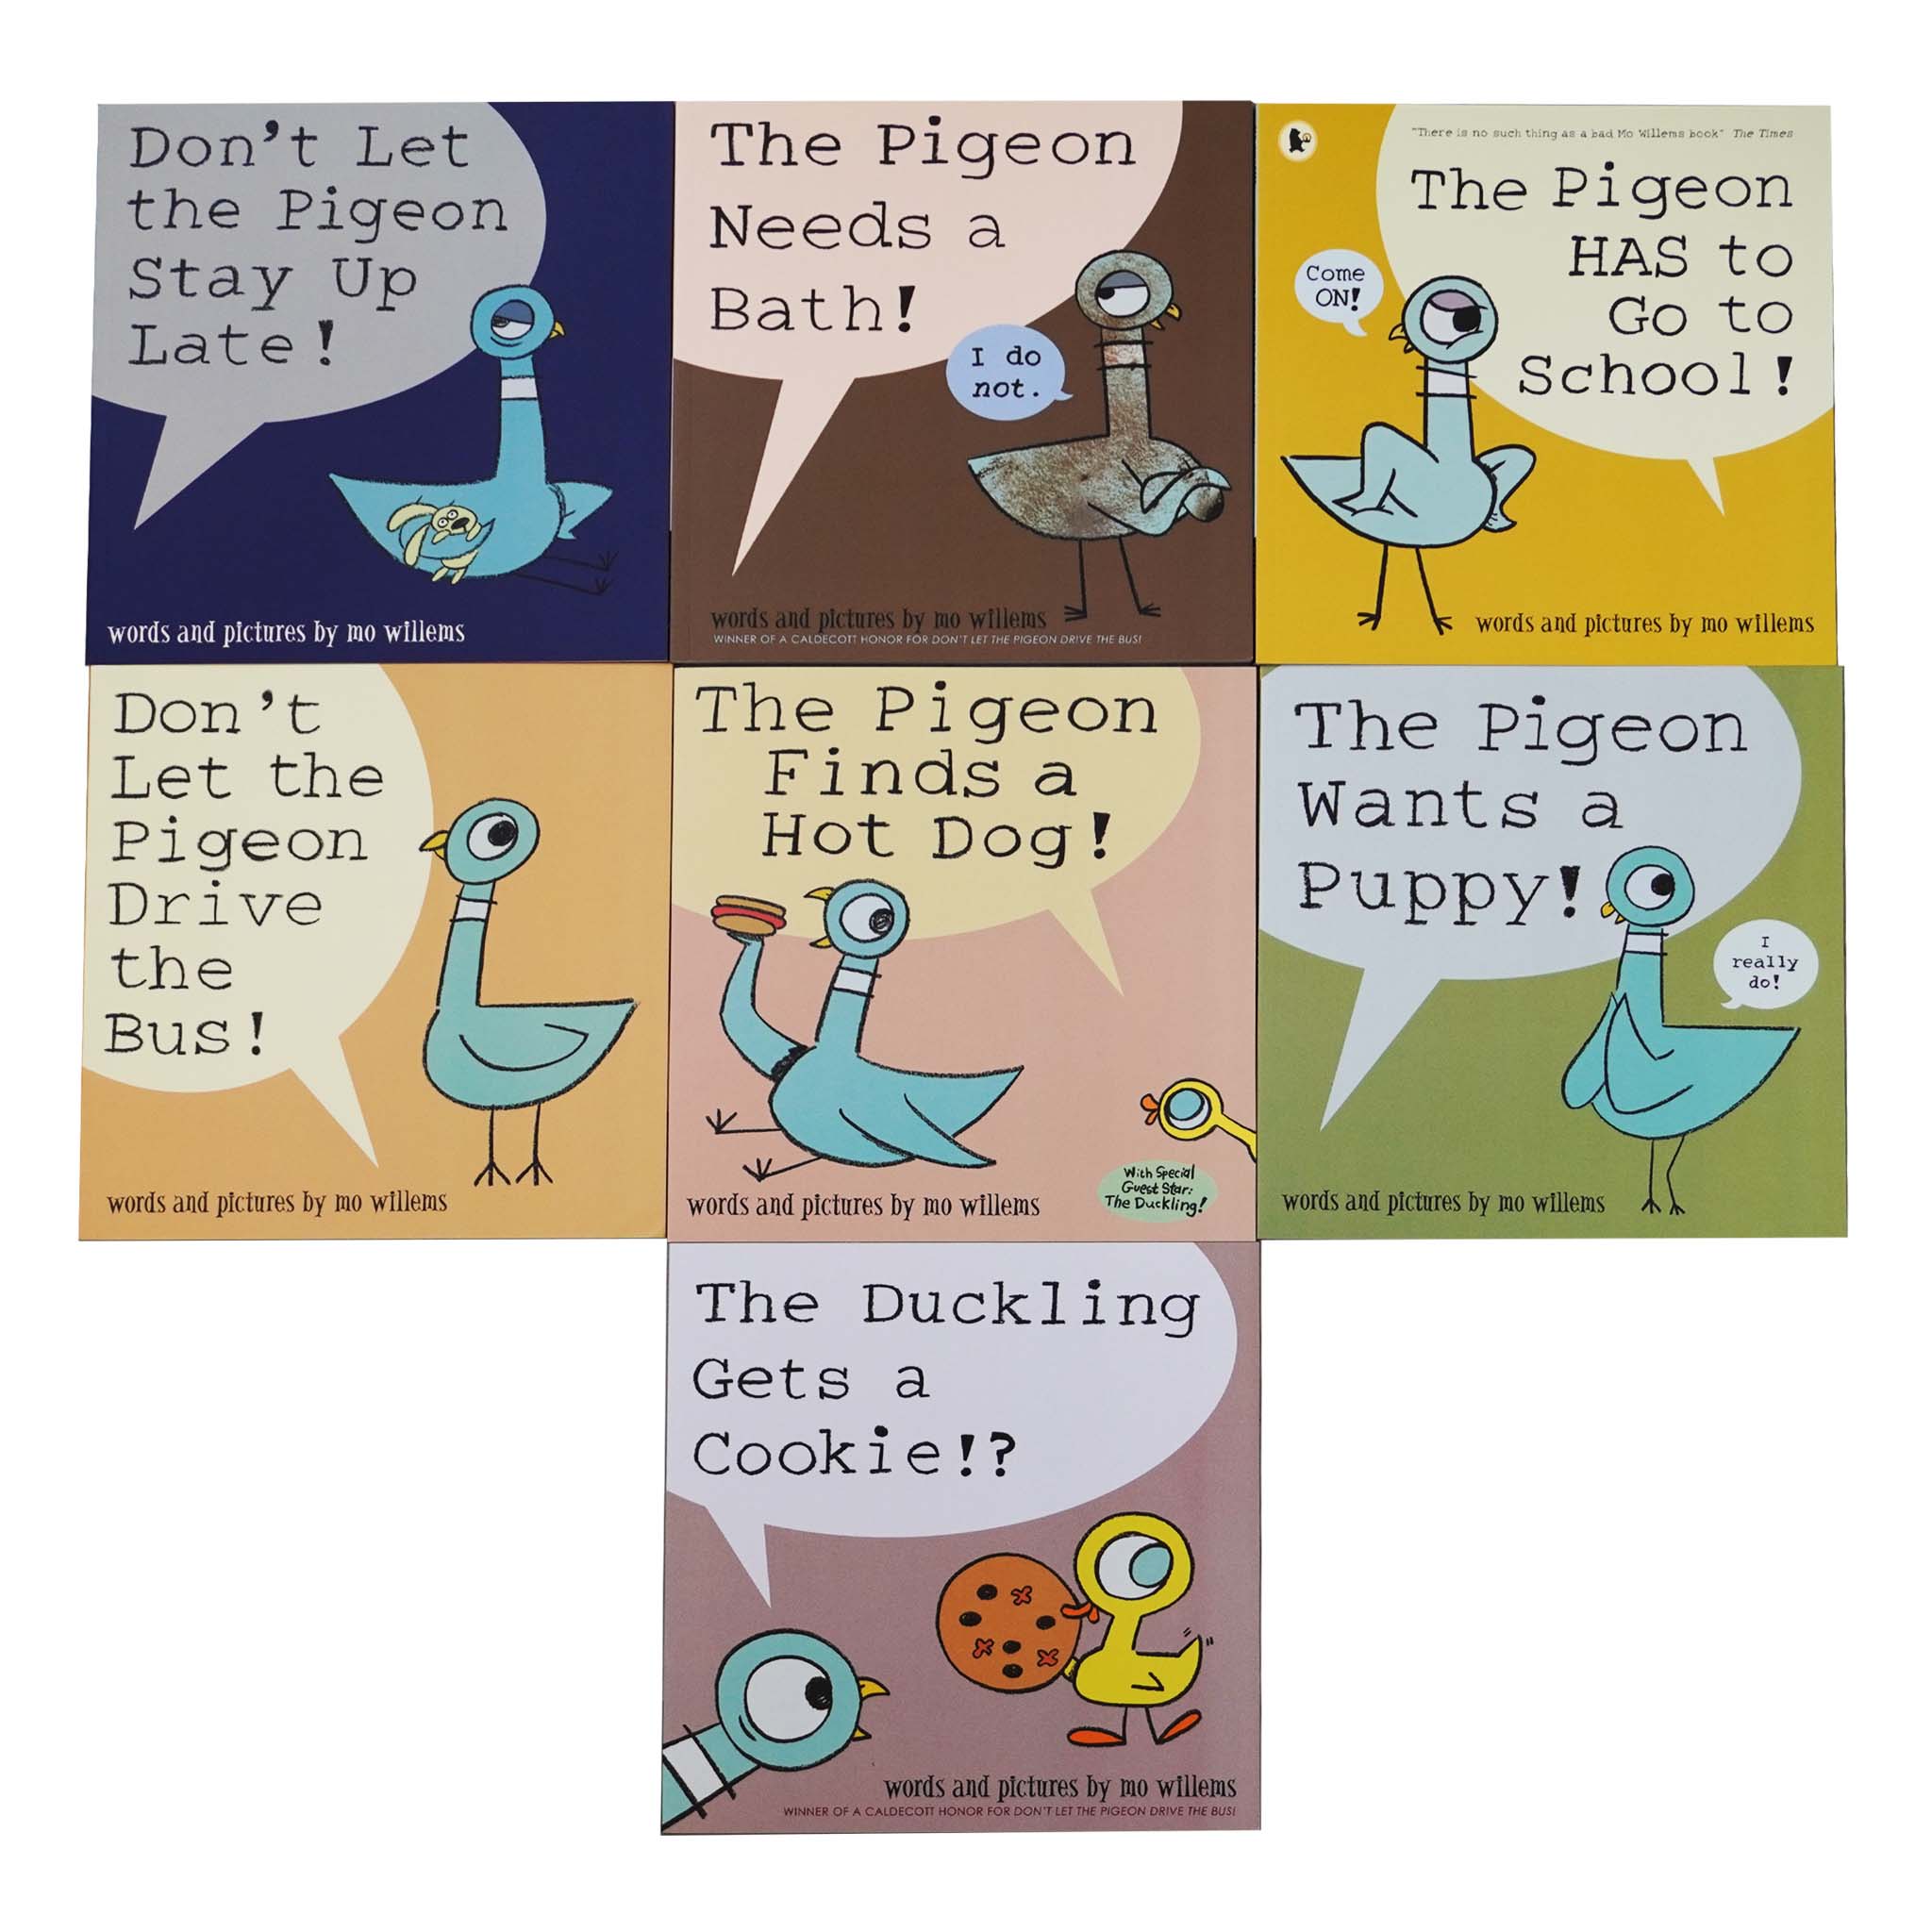 Don't Let the Pigeon Series By Mo Willems 7 Books Collection Set - Age 3-7 - Paperback